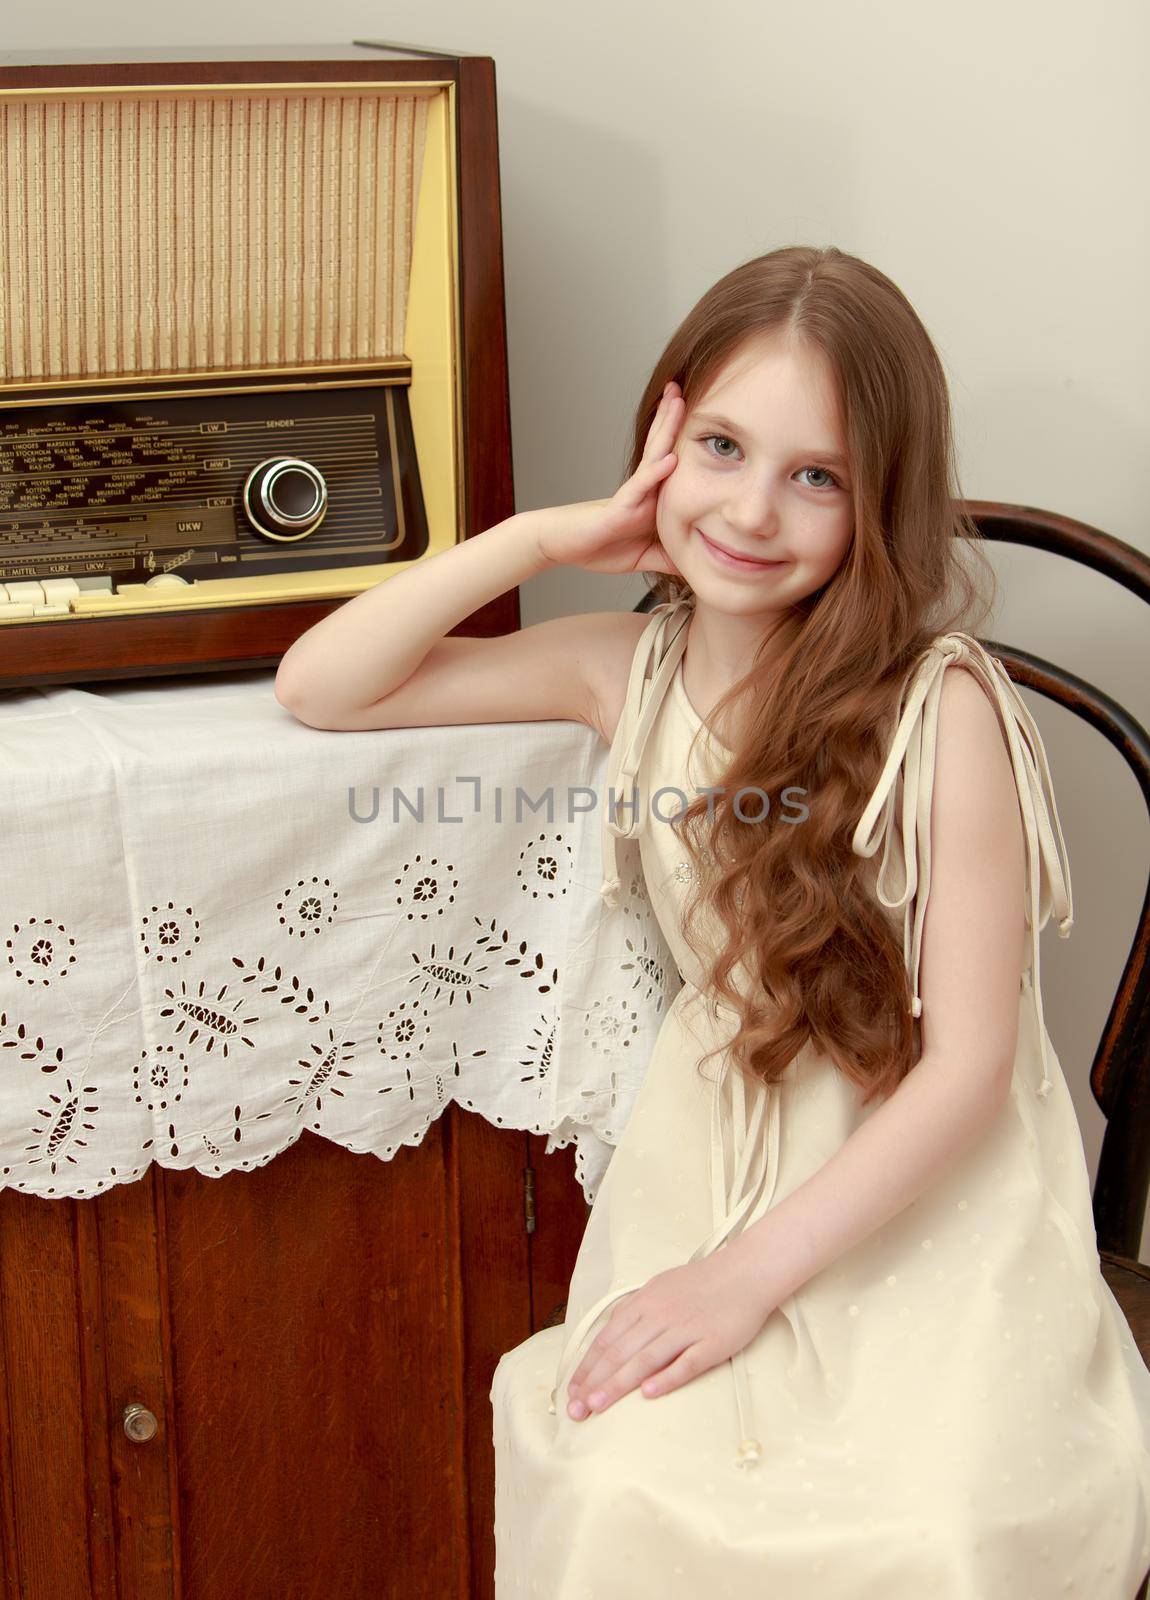 Gentle little girl with long brown hair to her waist . Girl sitting on an old Viennese chair near the old radio receiver